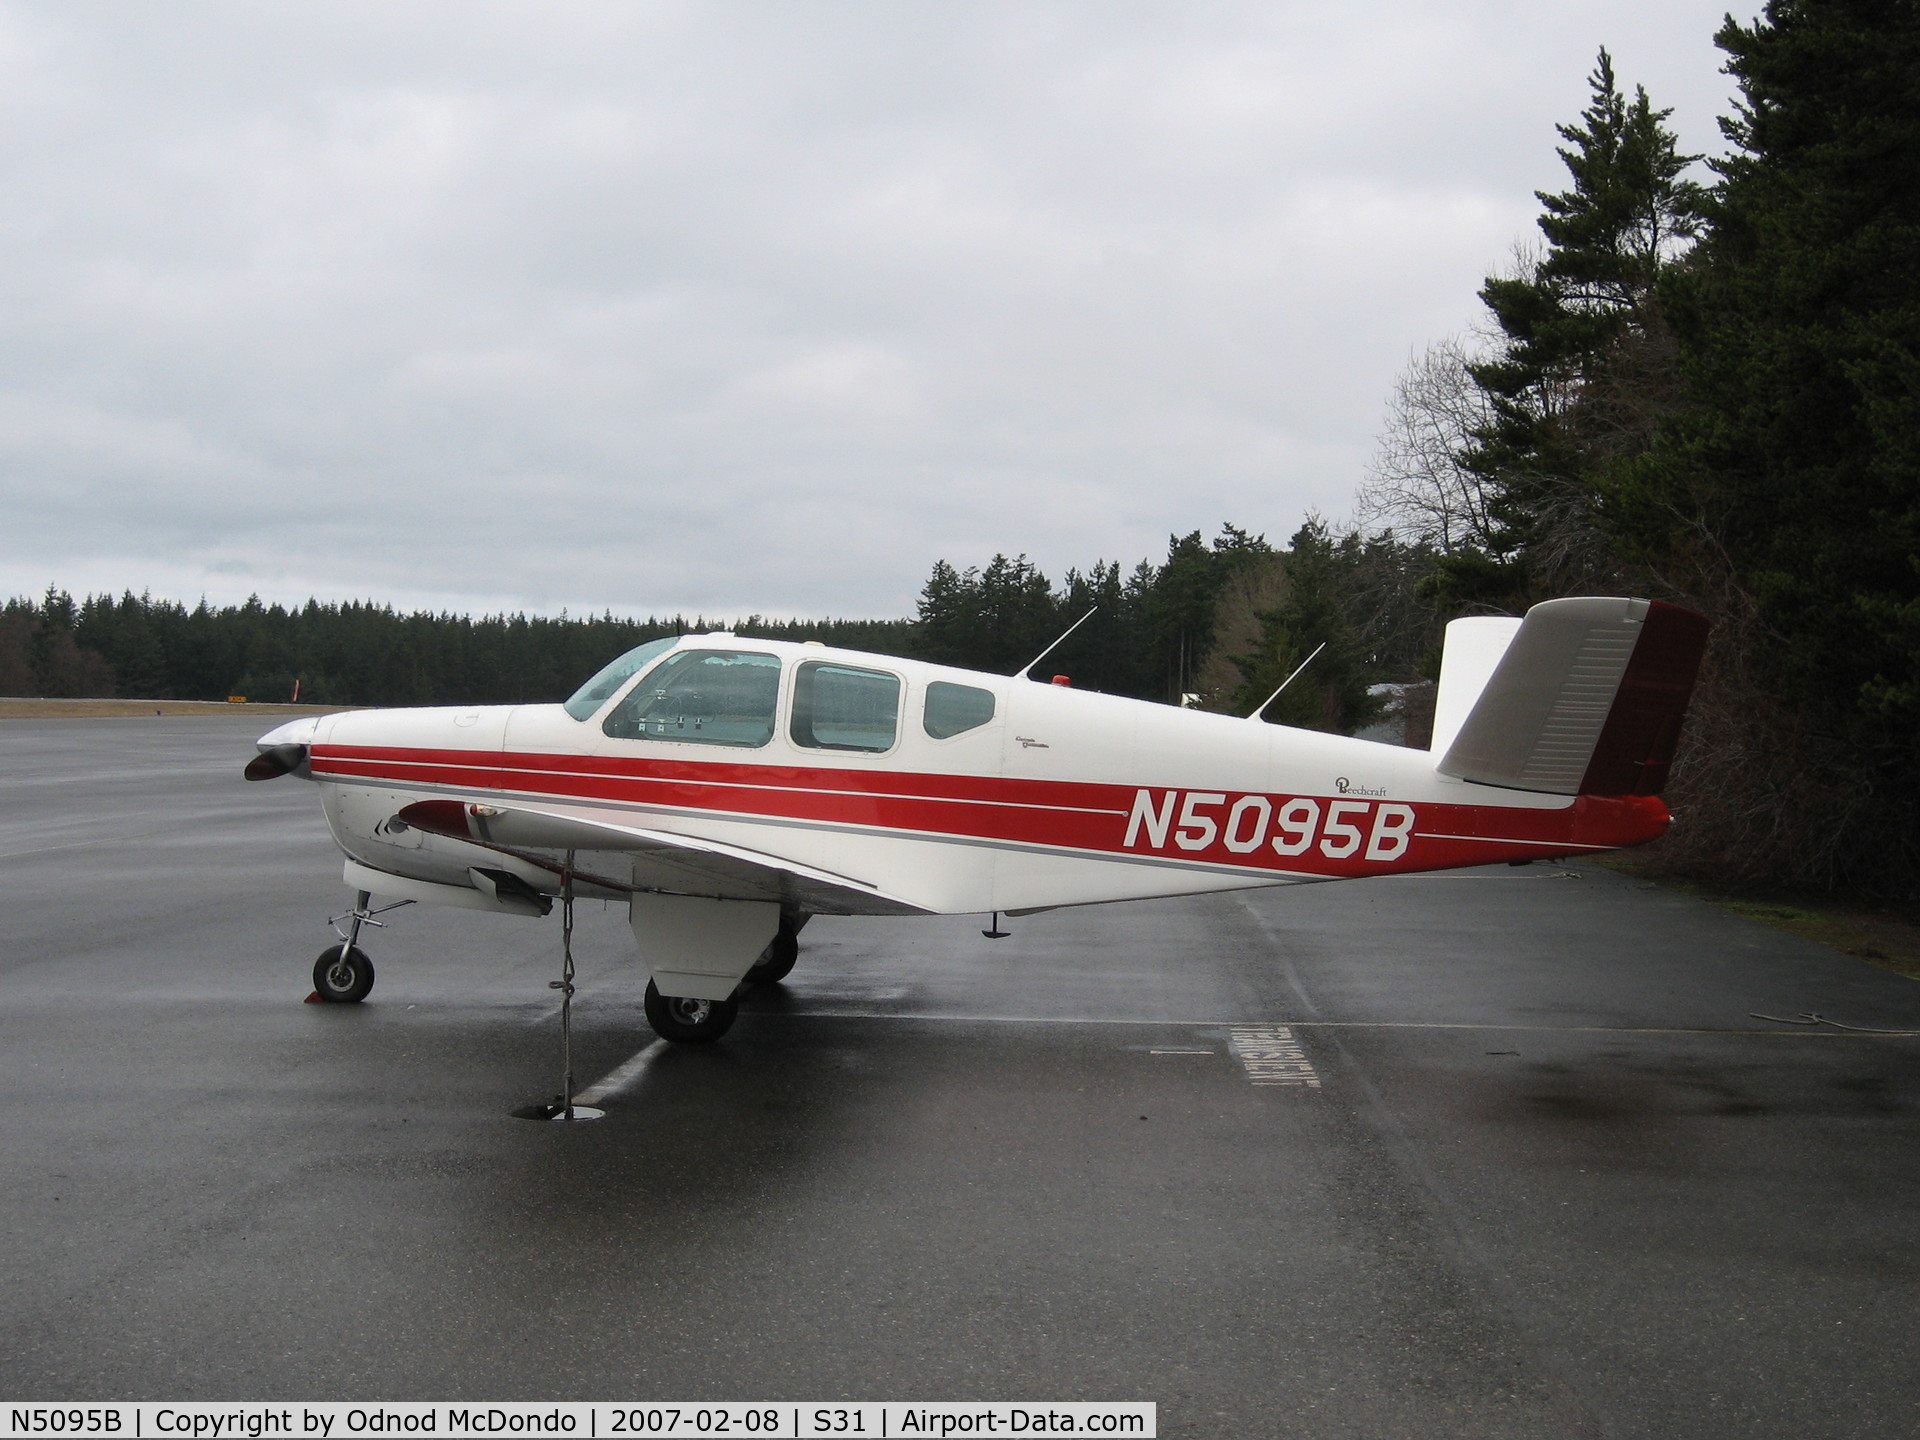 N5095B, 1955 Beech G35 Bonanza C/N D-4393, Only aircraft on the airport today